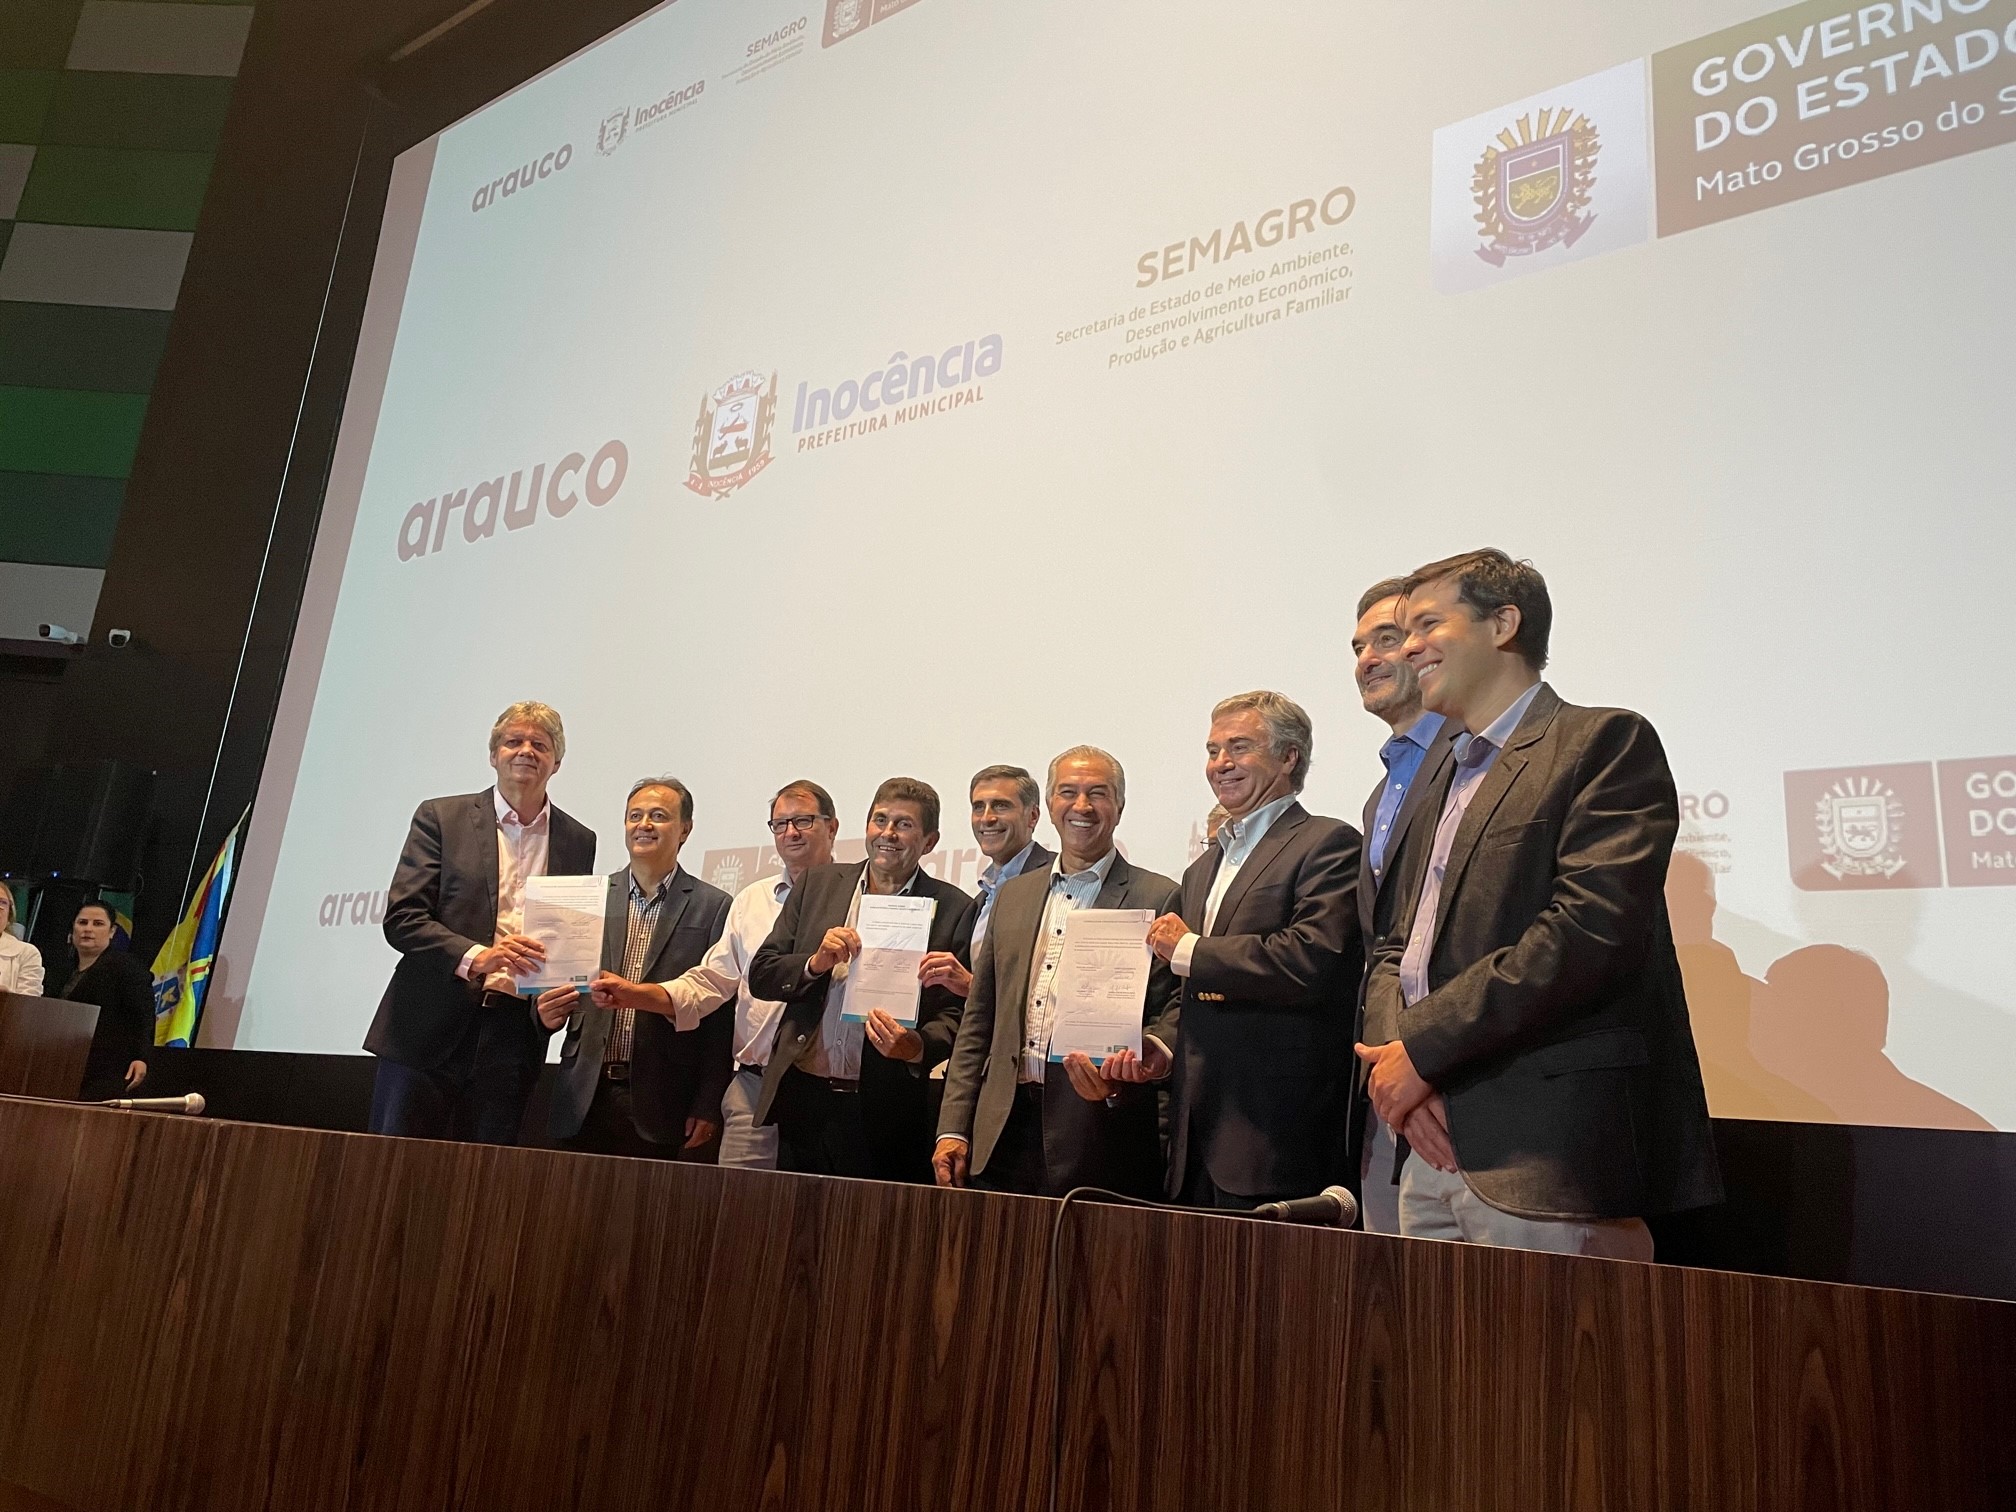 ARAUCO announced the collaboration agreement between the company and the State of Mato Grosso do Sul in Brazil for the construction of a new pulp mill in this country considering an investment of US$ 3 billion.